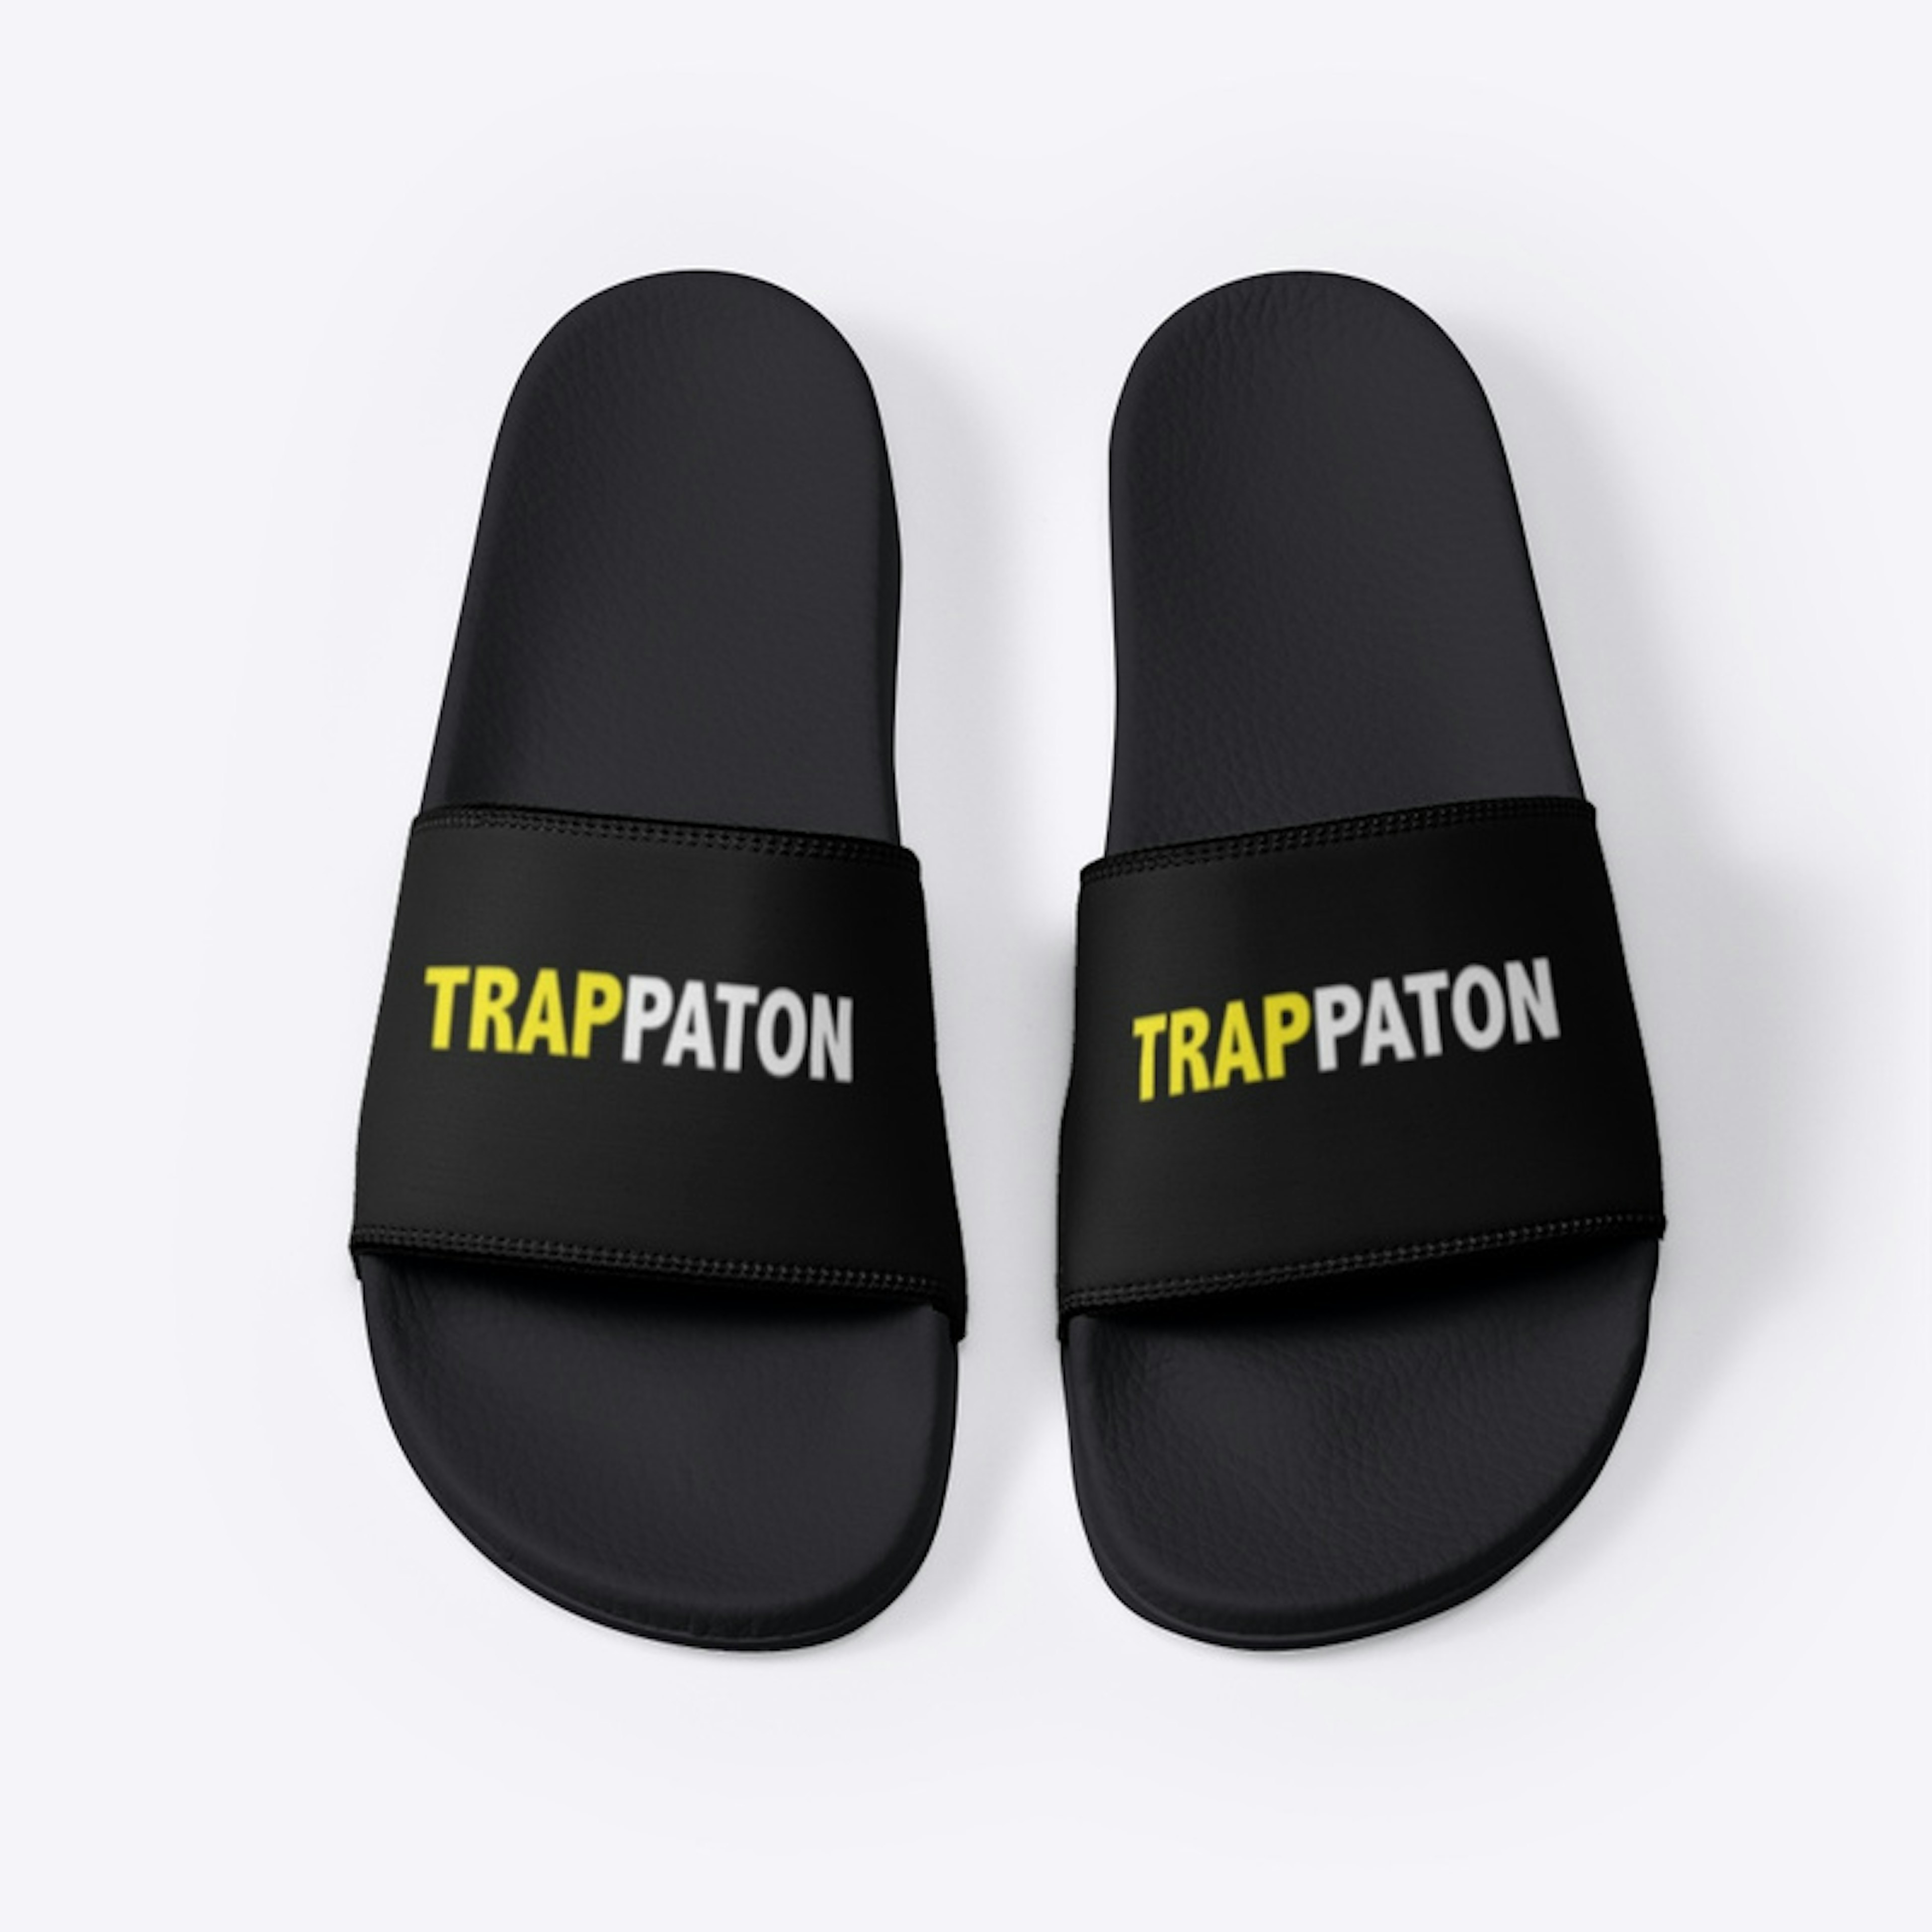 TRAPPATON SLIPPERS